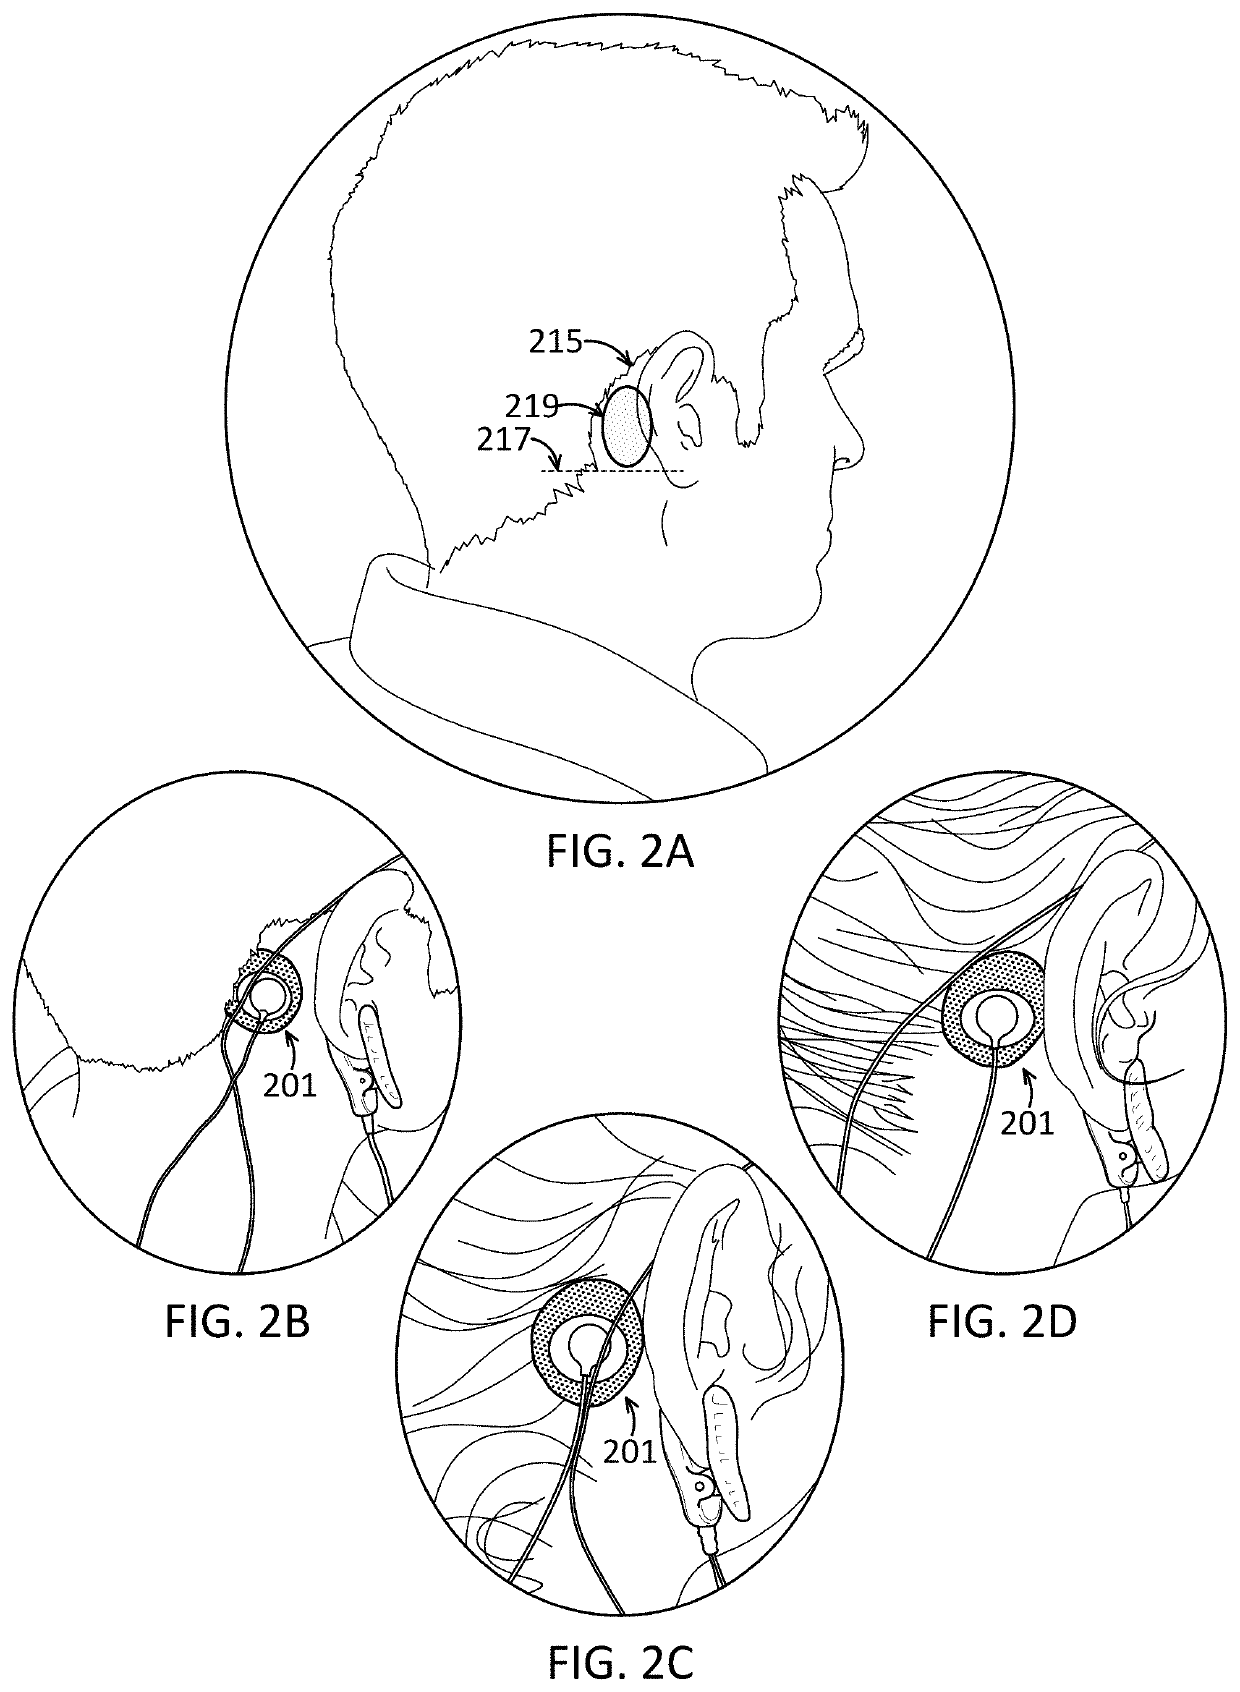 Apparatuses and methods for transdermal electrical stimulation of nerves to modify or induce a cognitive state